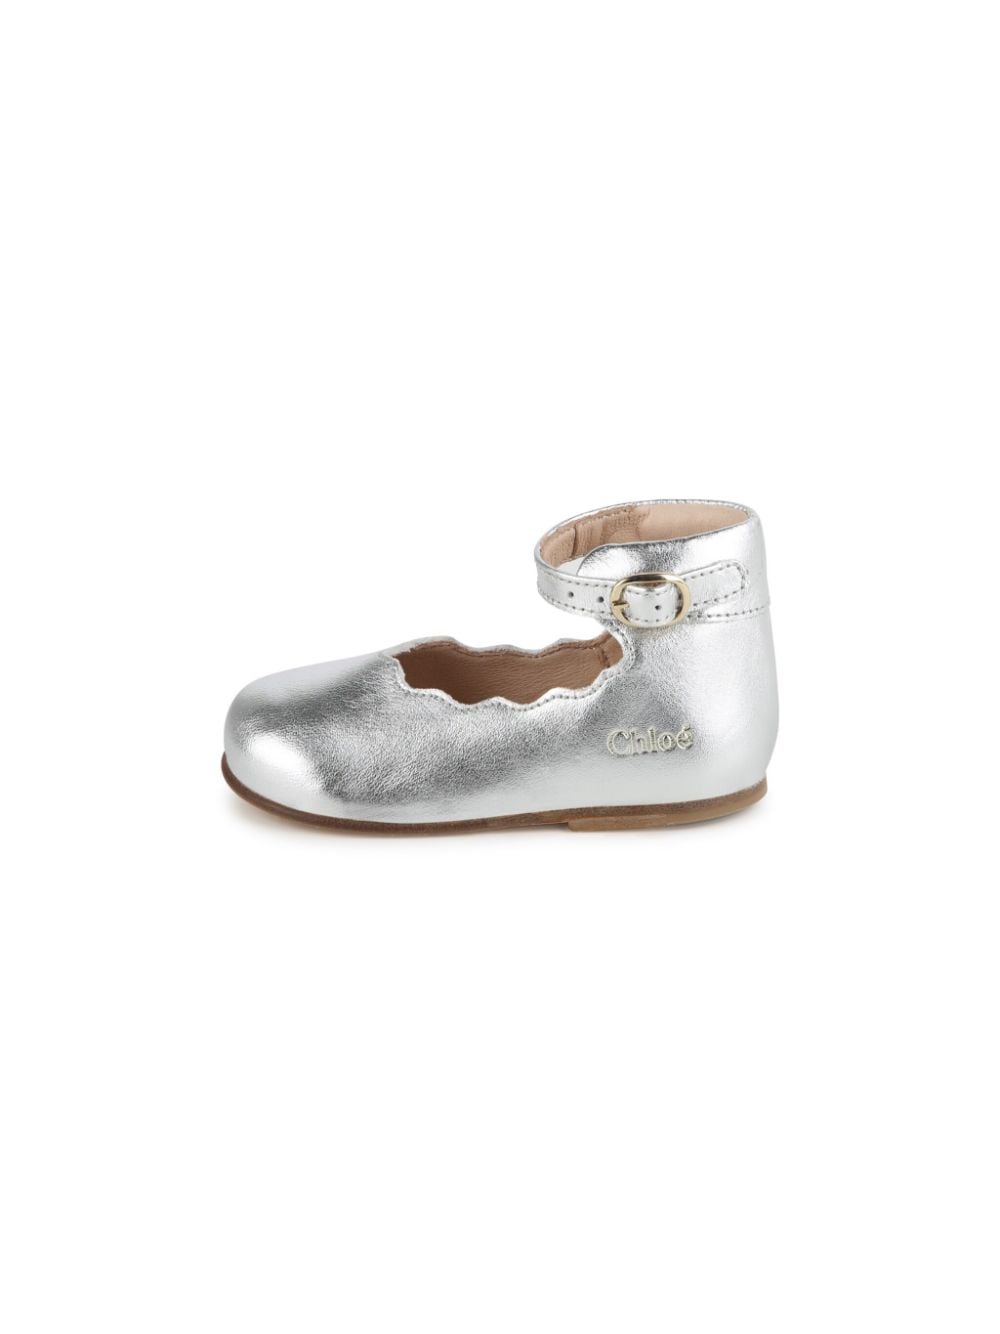 Shop Chloé Buckled Leather Ballerina Shoes In Silver